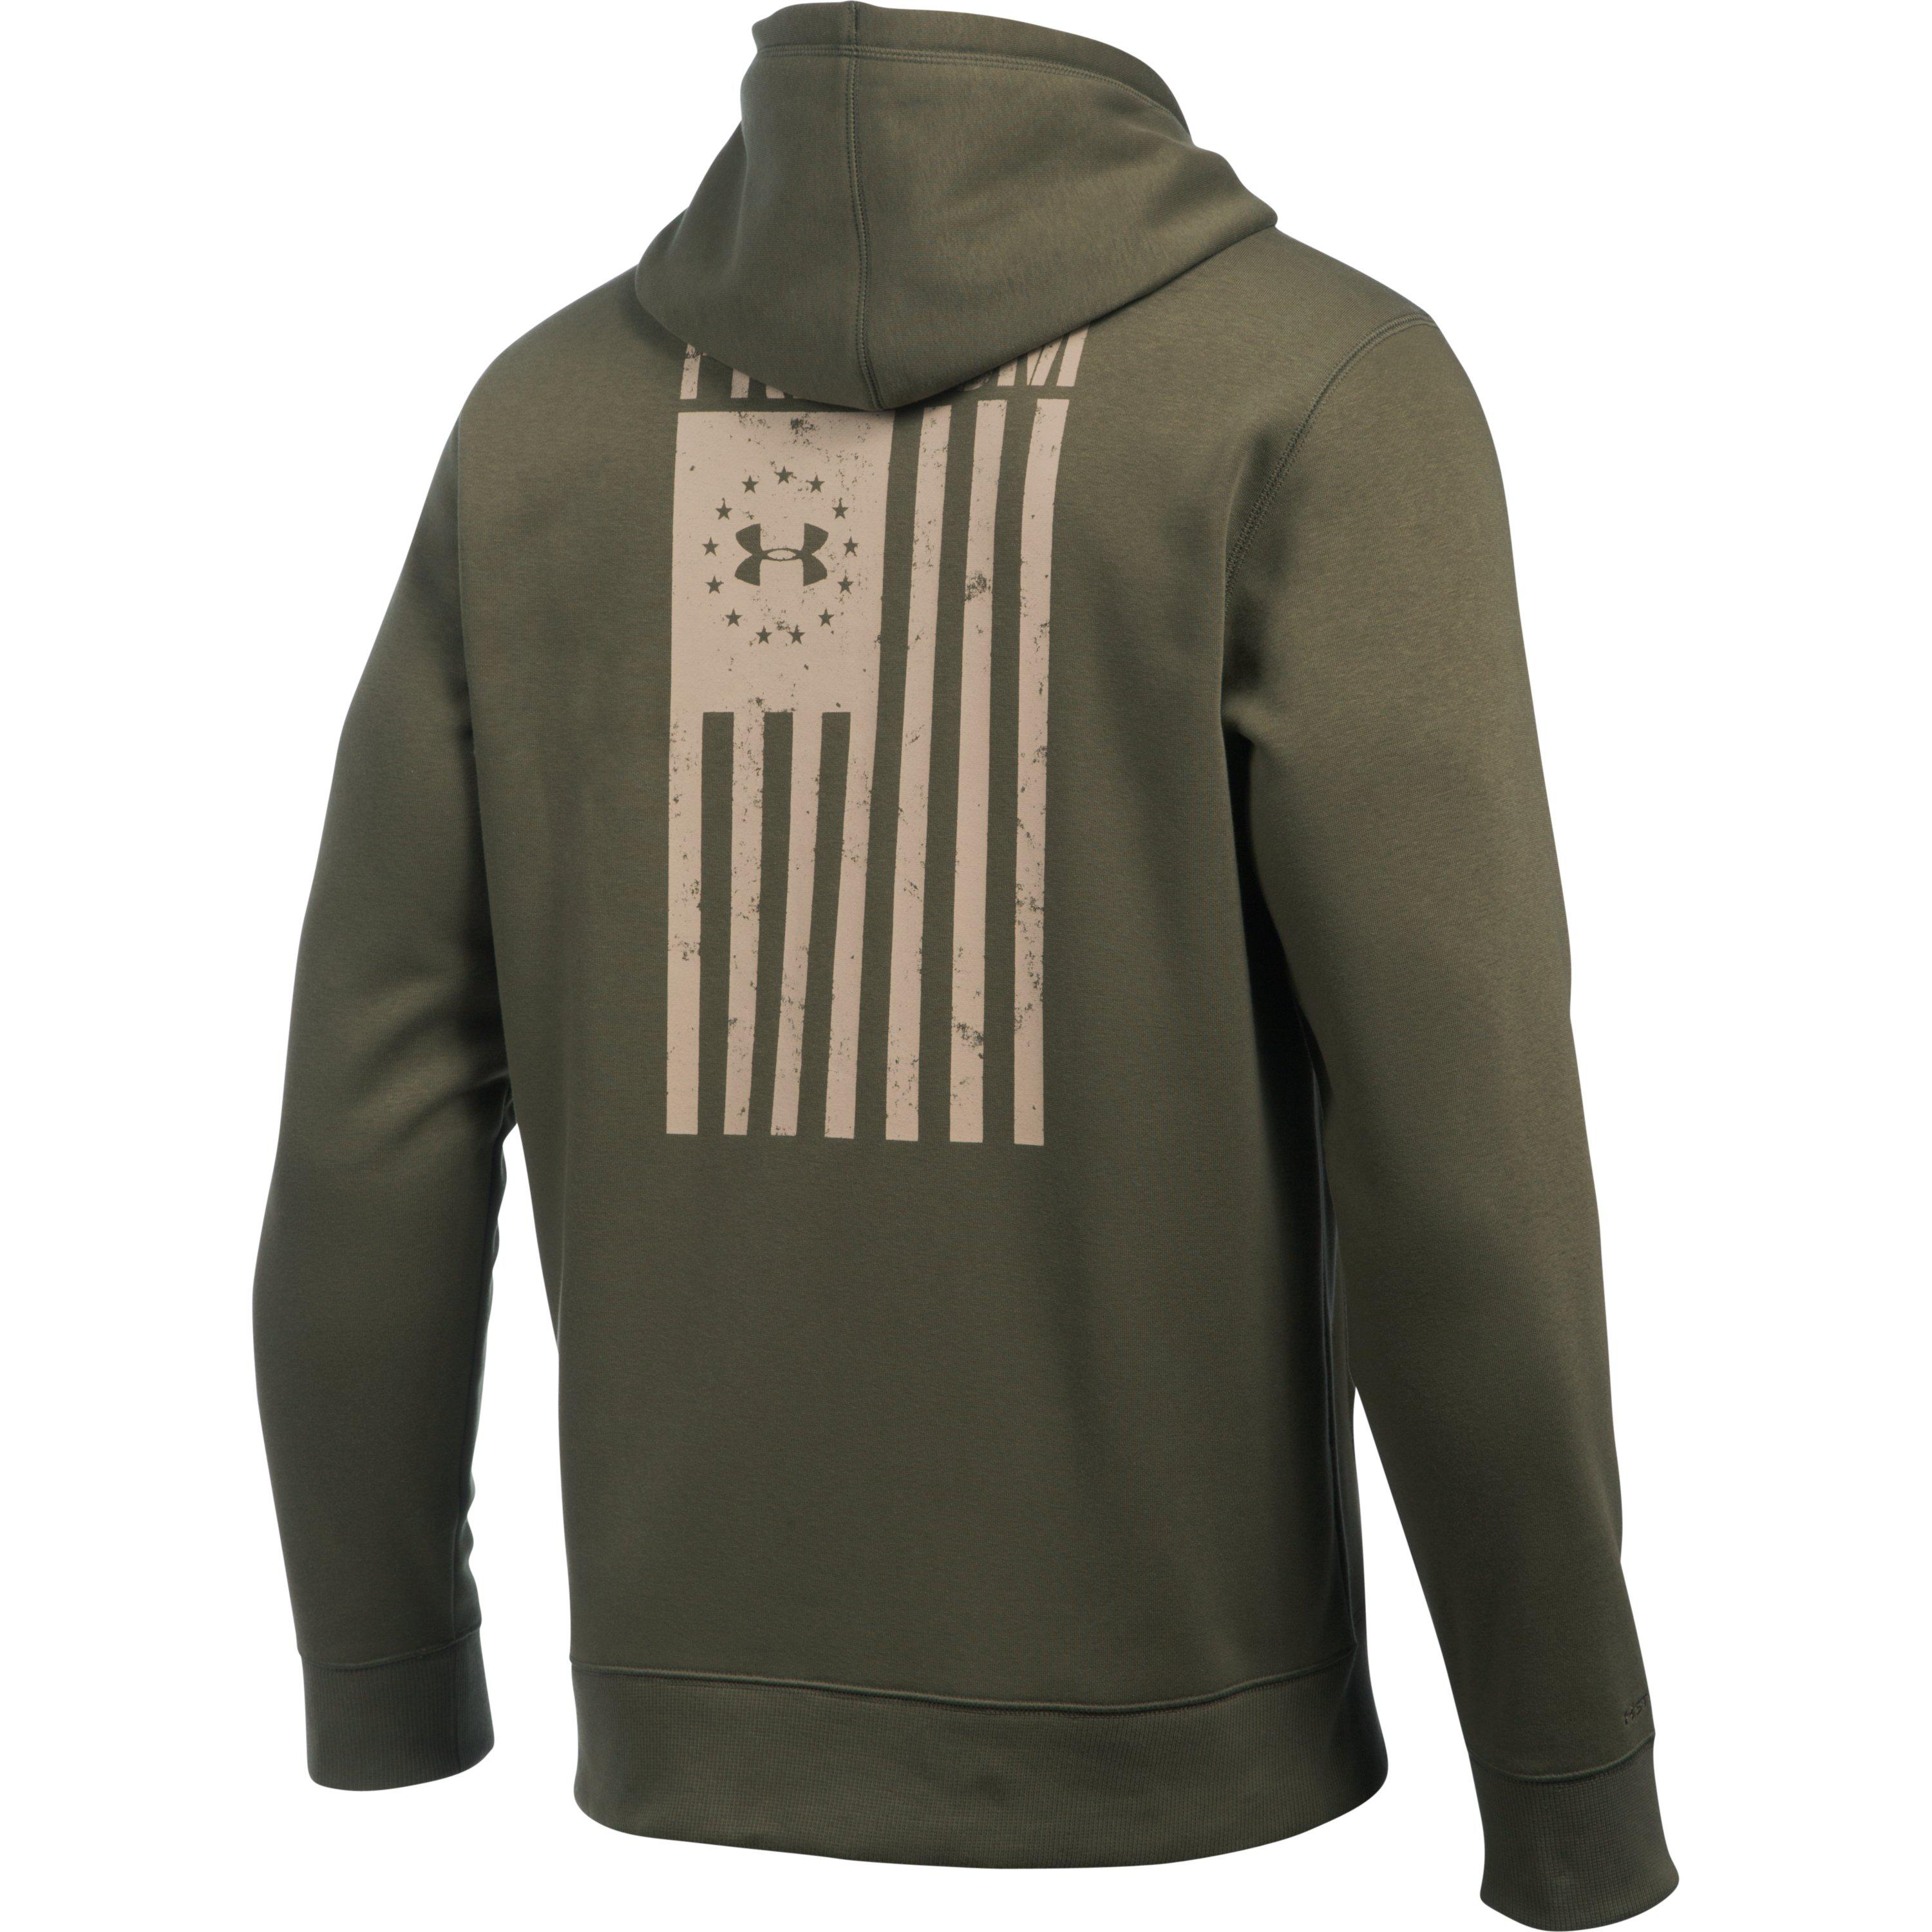 Under Armour Cotton Men's Ua Freedom Flag Hoodie in Marine od Green